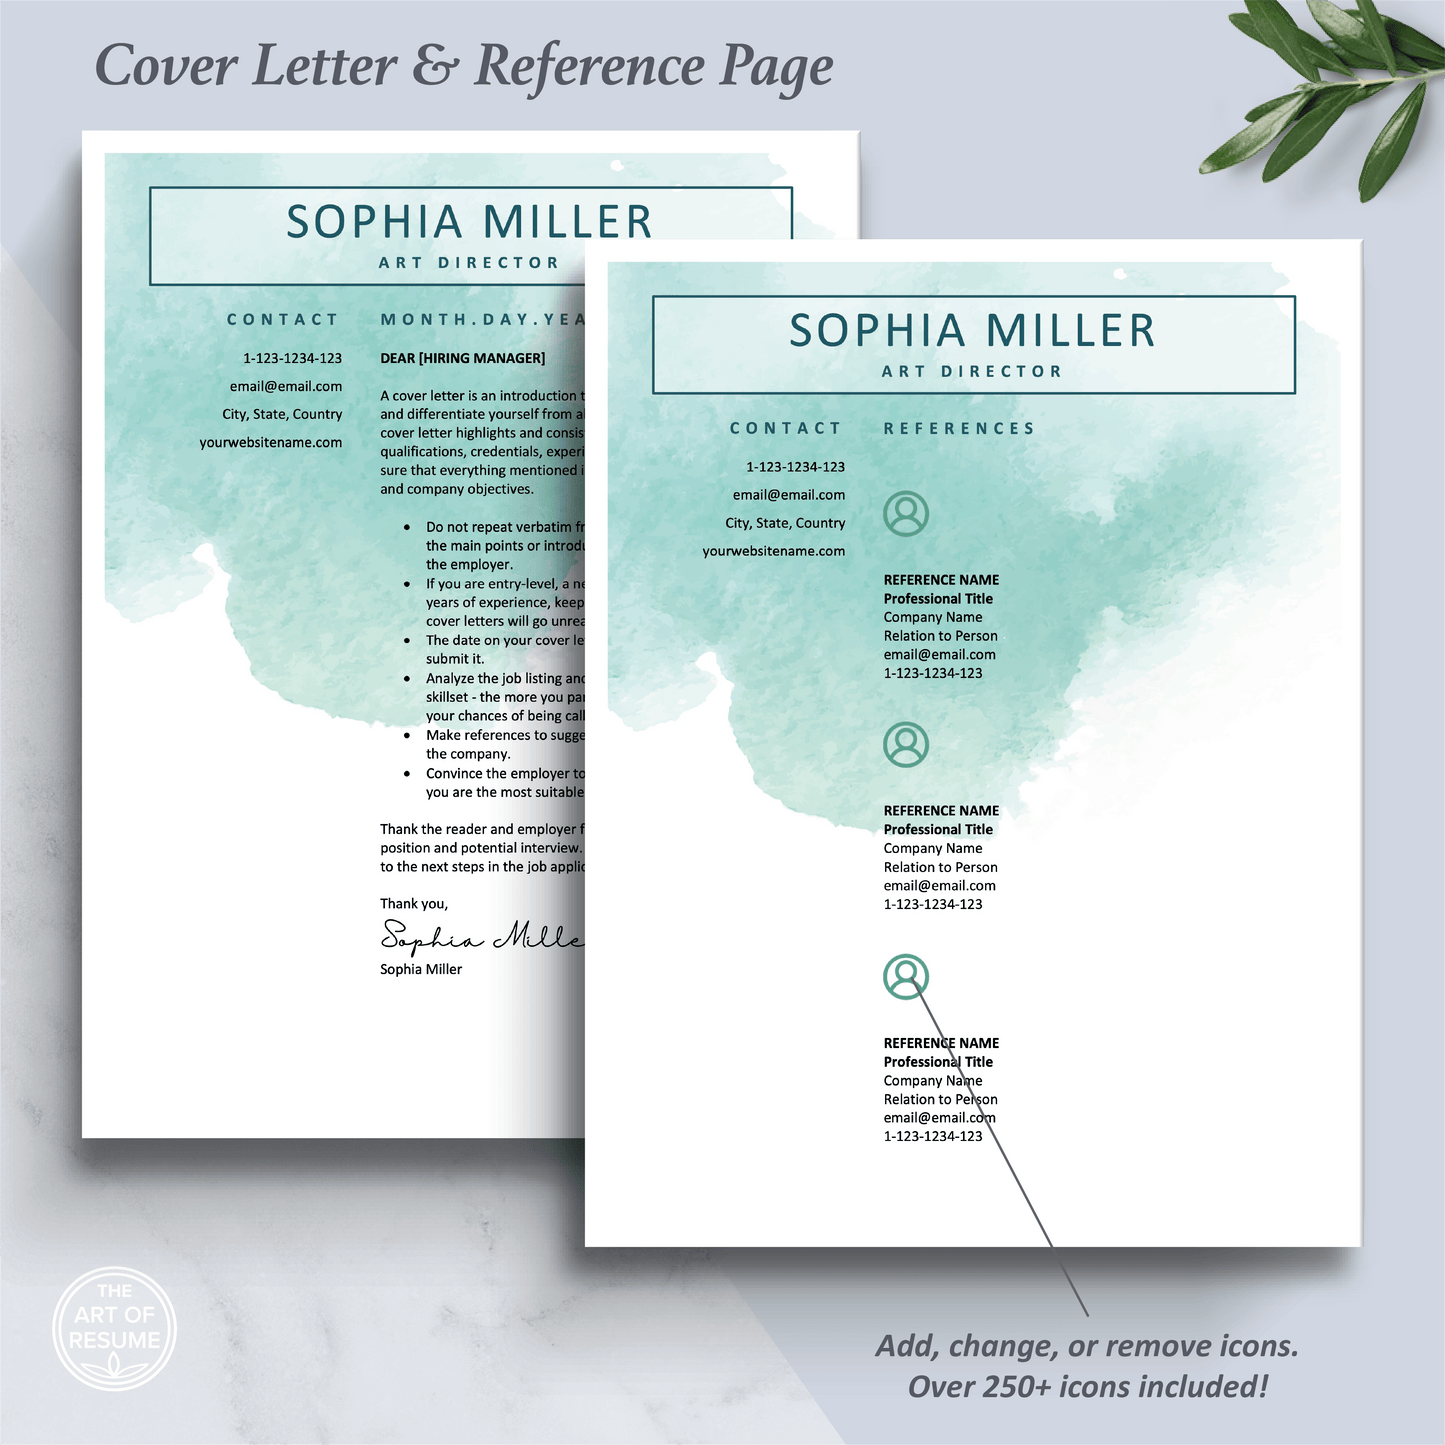 The Art of Resume Templates |  Creative Teal Blue Watercolor  Cover Letter and Reference Page Design Templates Instant Download